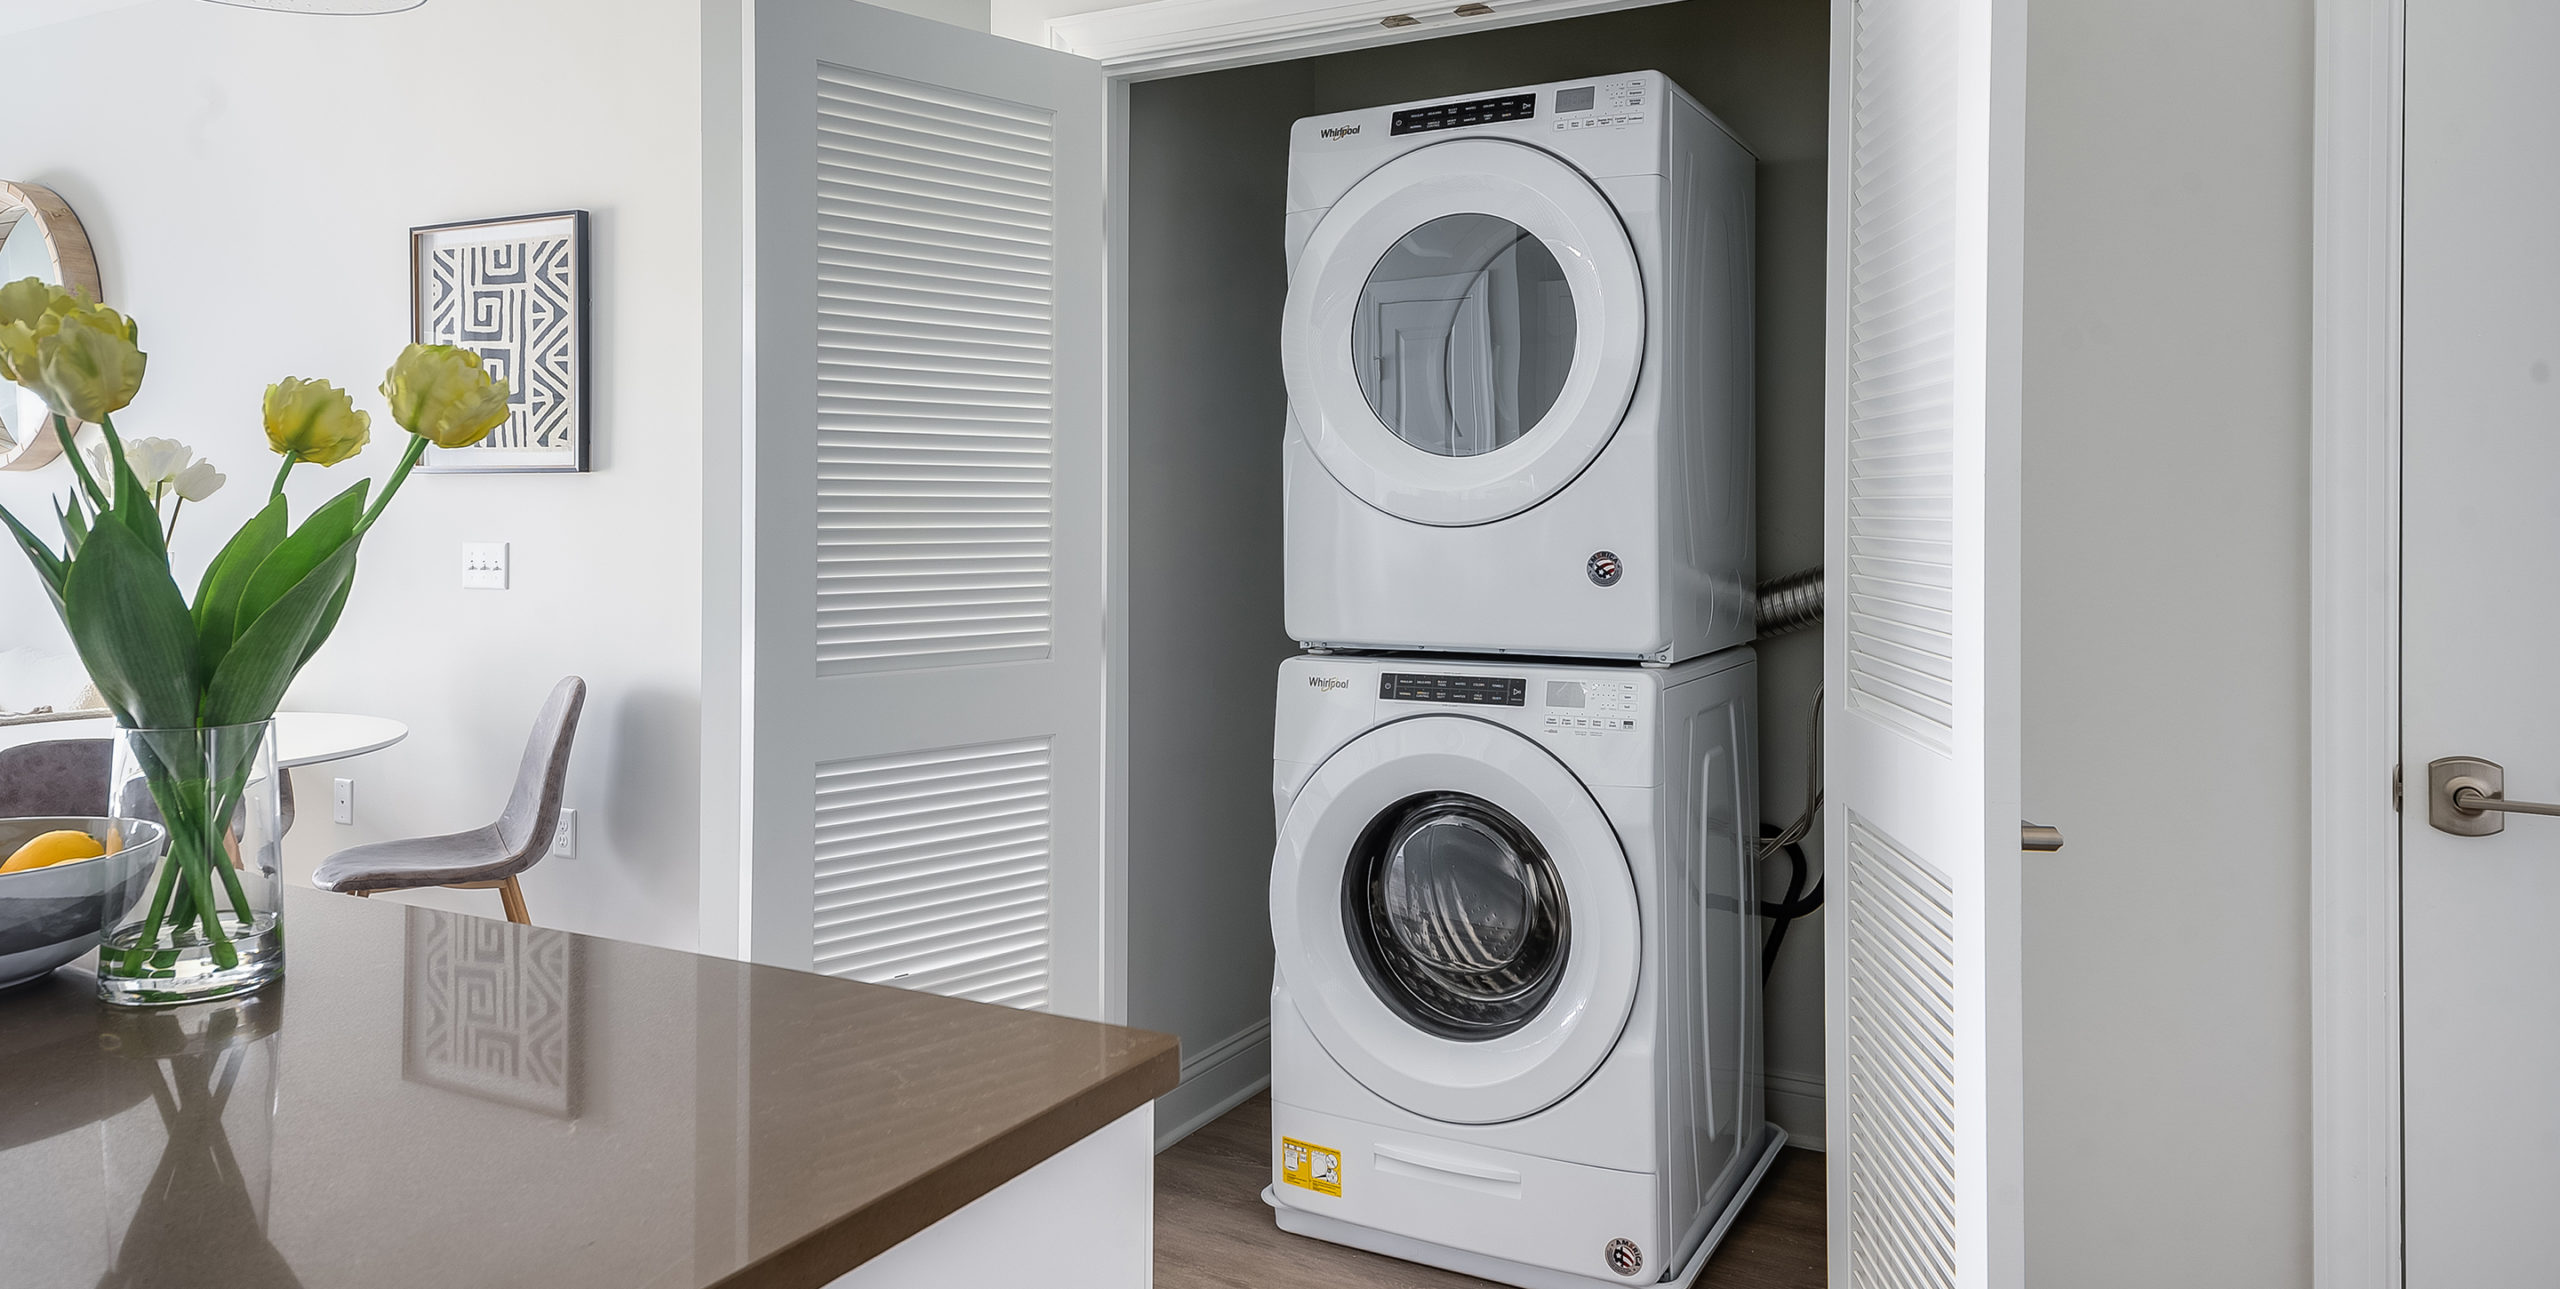 The Wel washer and dryer